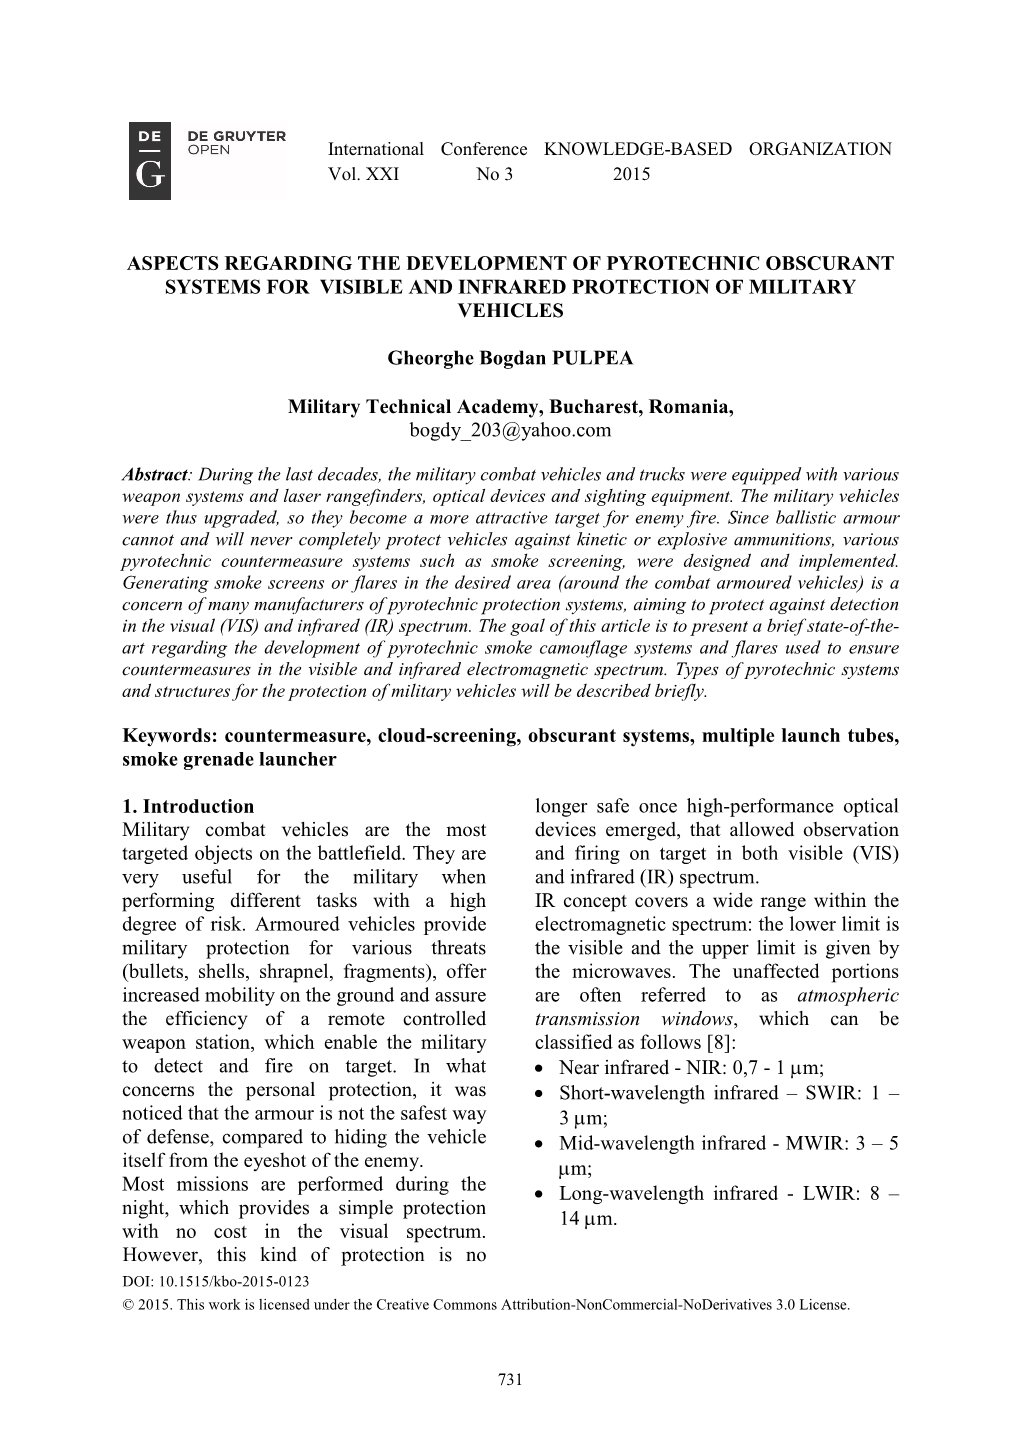 Aspects Regarding the Development of Pyrotechnic Obscurant Systems for Visible and Infrared Protection of Military Vehicles